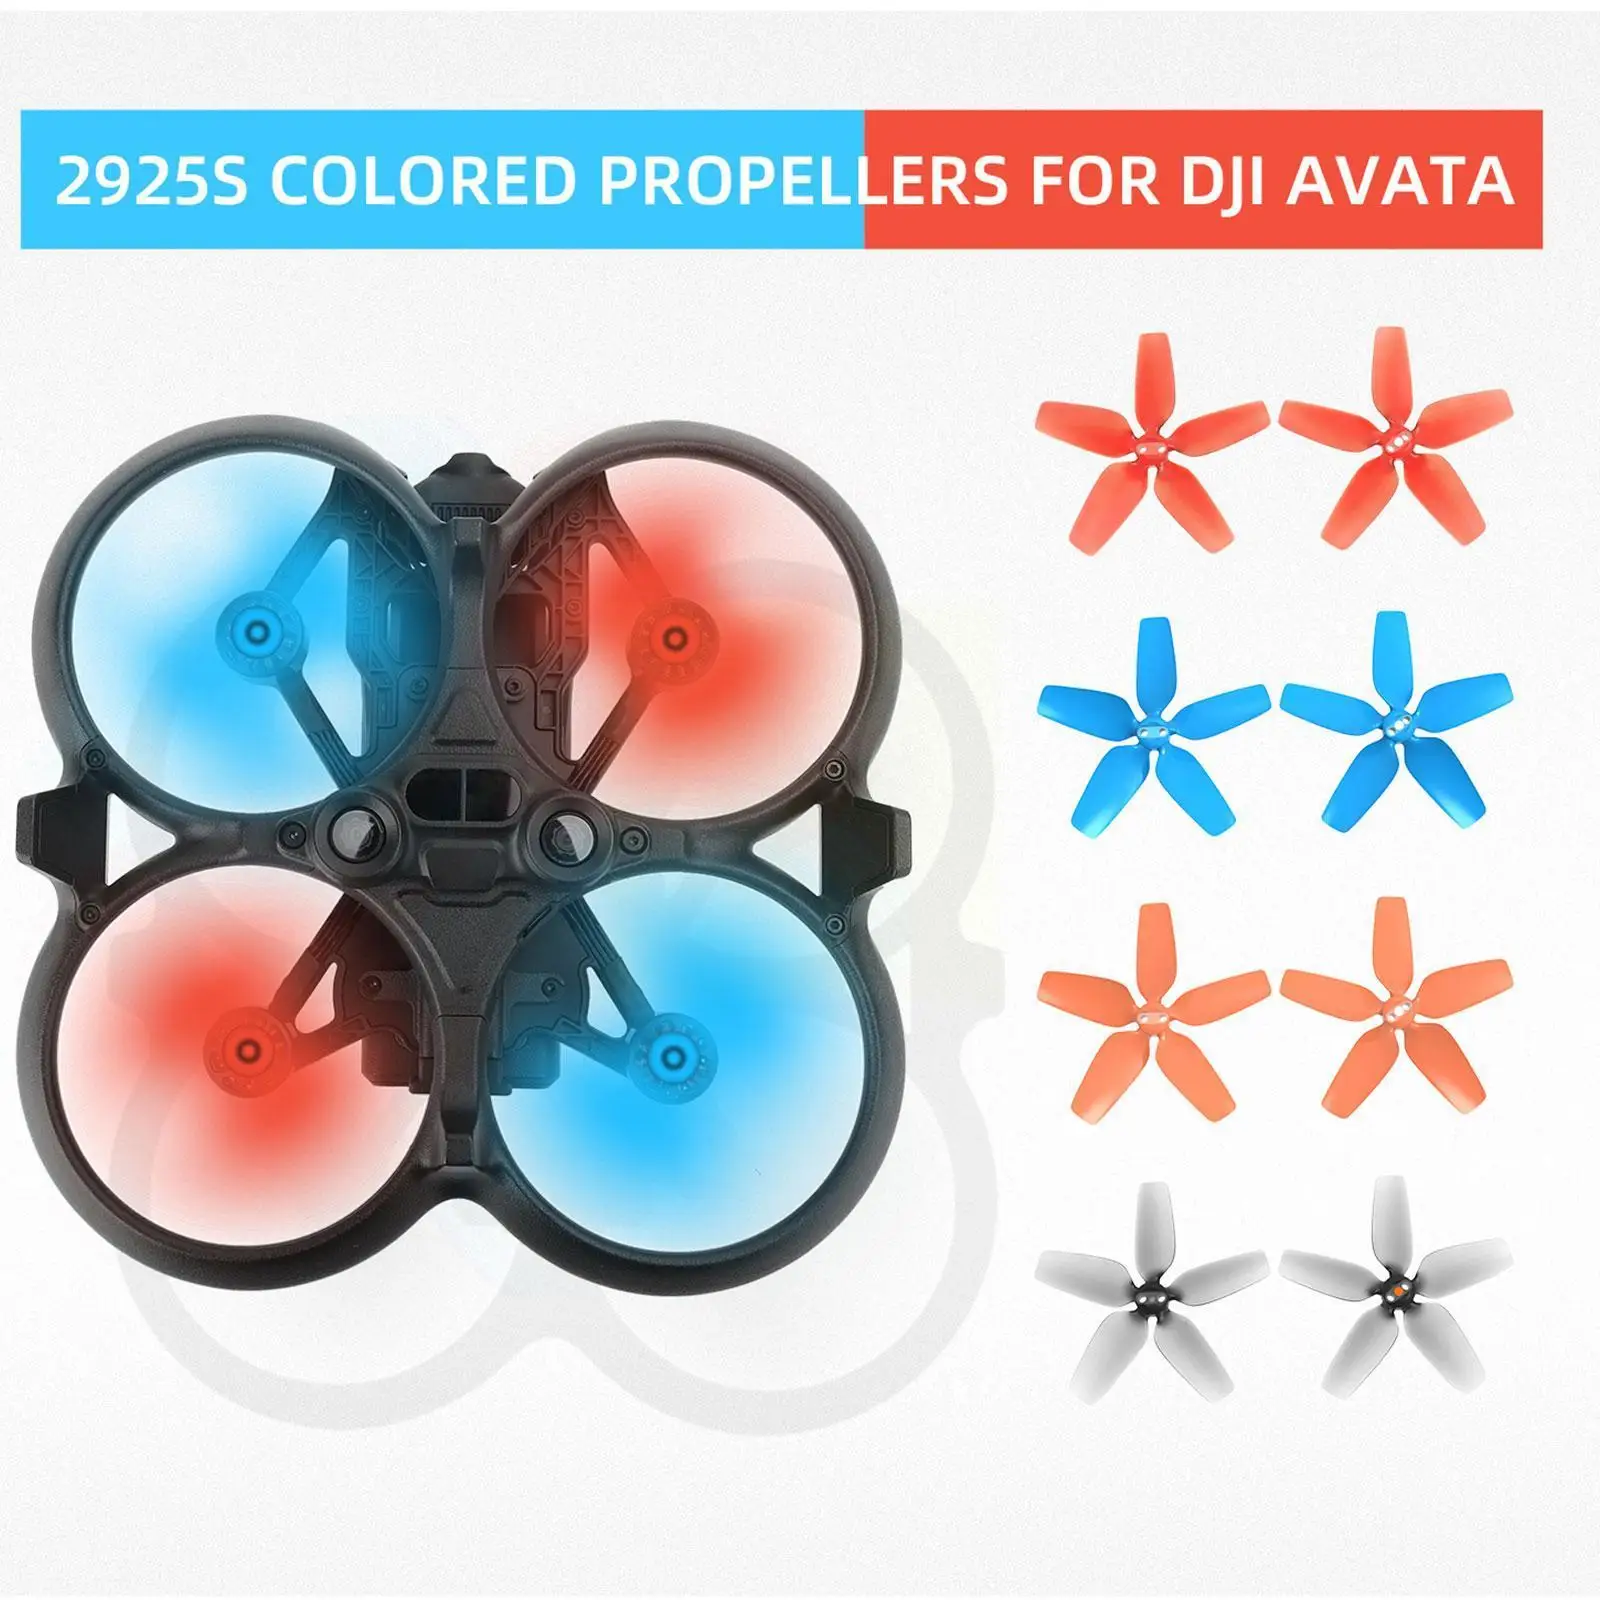 Купи Drone Propeller 5 Blade Props Replacement Kit For Avata 2925s Colorful Lightweight Wing Fans Drone Propeller Accessorie Y3i1 за 221 рублей в магазине AliExpress